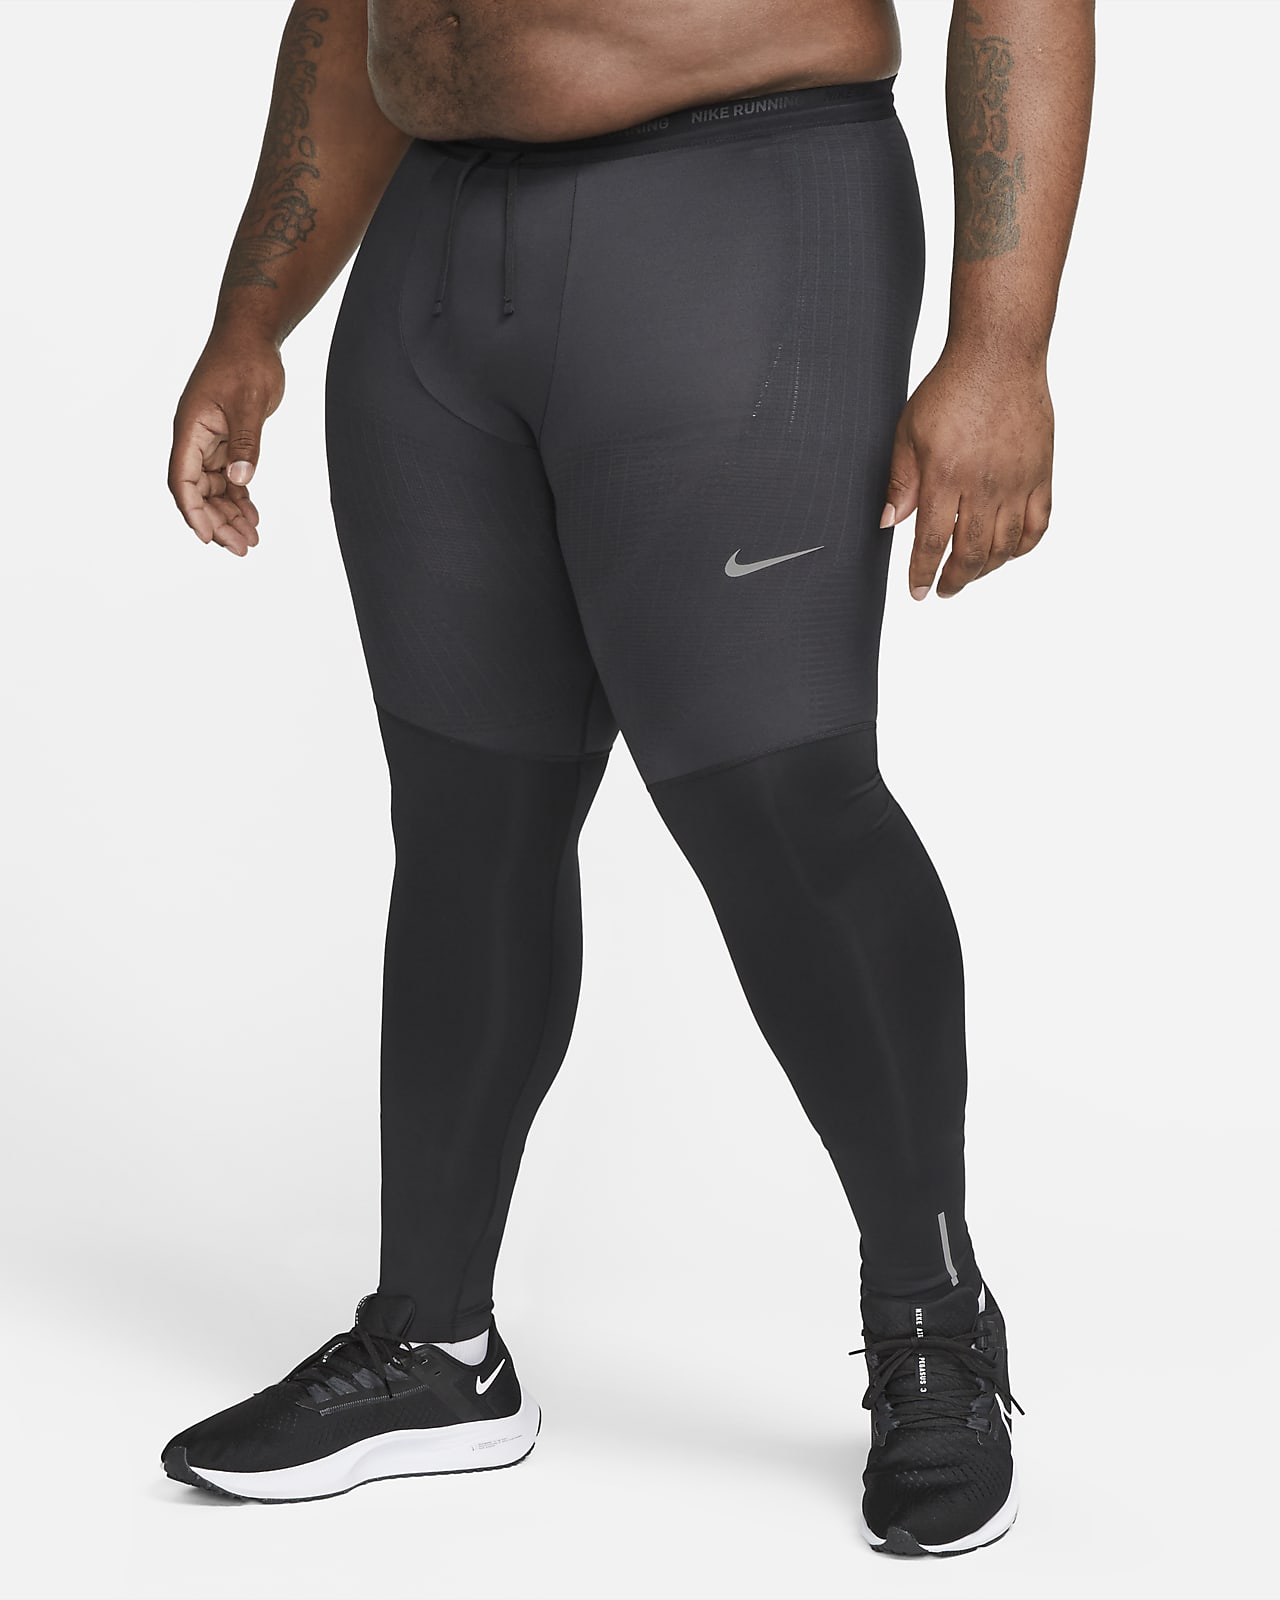 NWT! Nike Pro Compression 3/4 Tights Solid Black (BV5643-010) Men's Size  Small